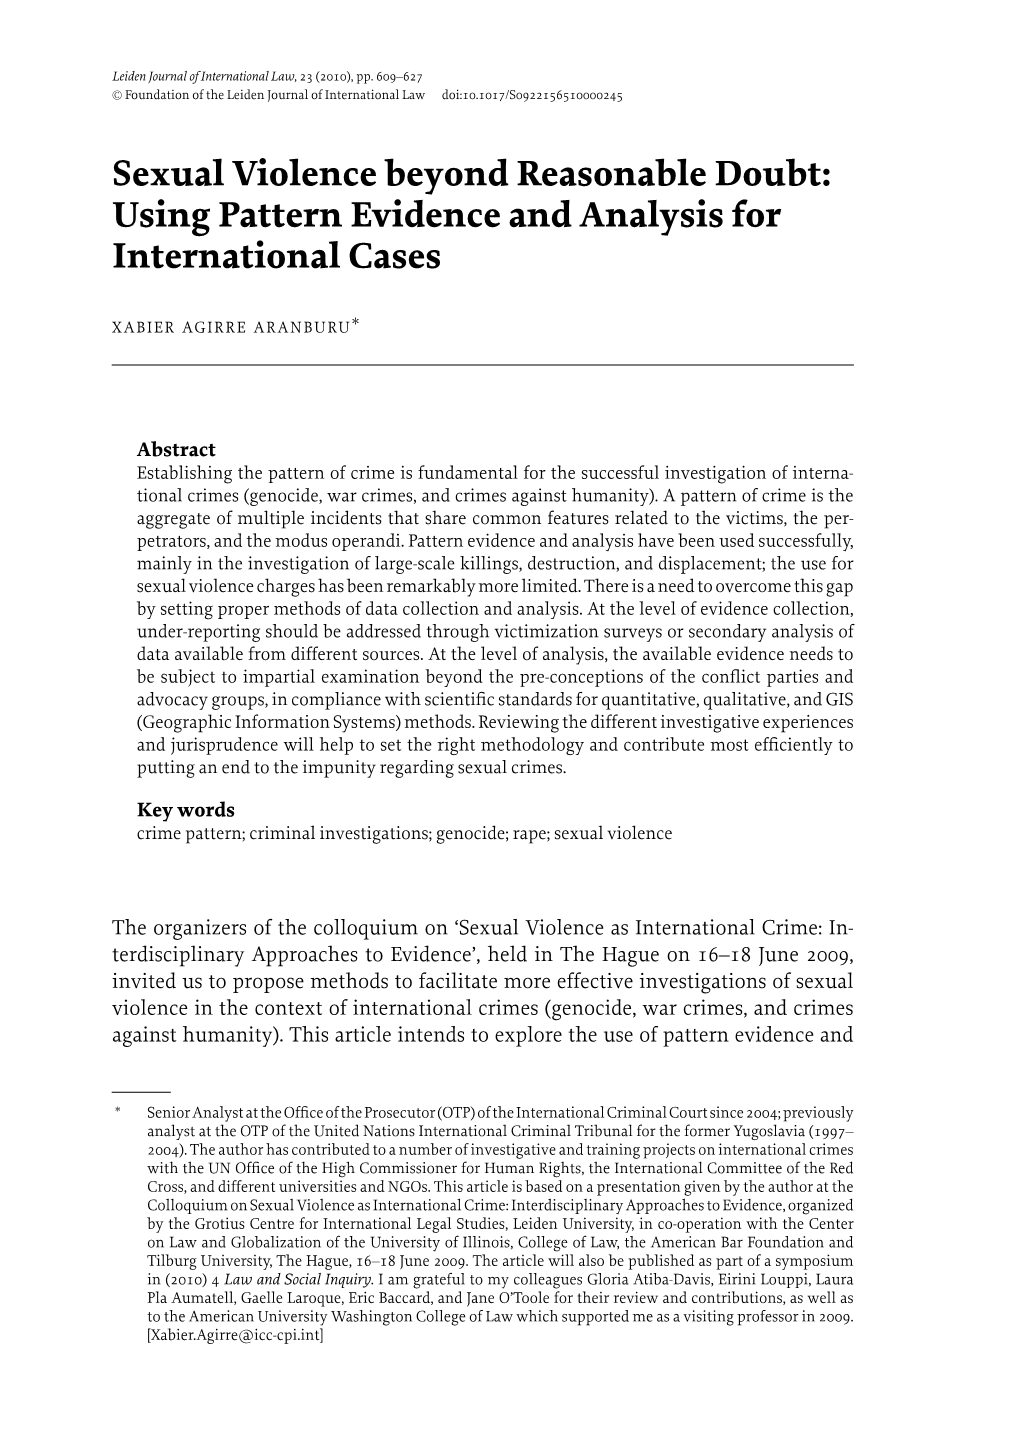 Sexual Violence Beyond Reasonable Doubt: Using Pattern Evidence and Analysis for International Cases